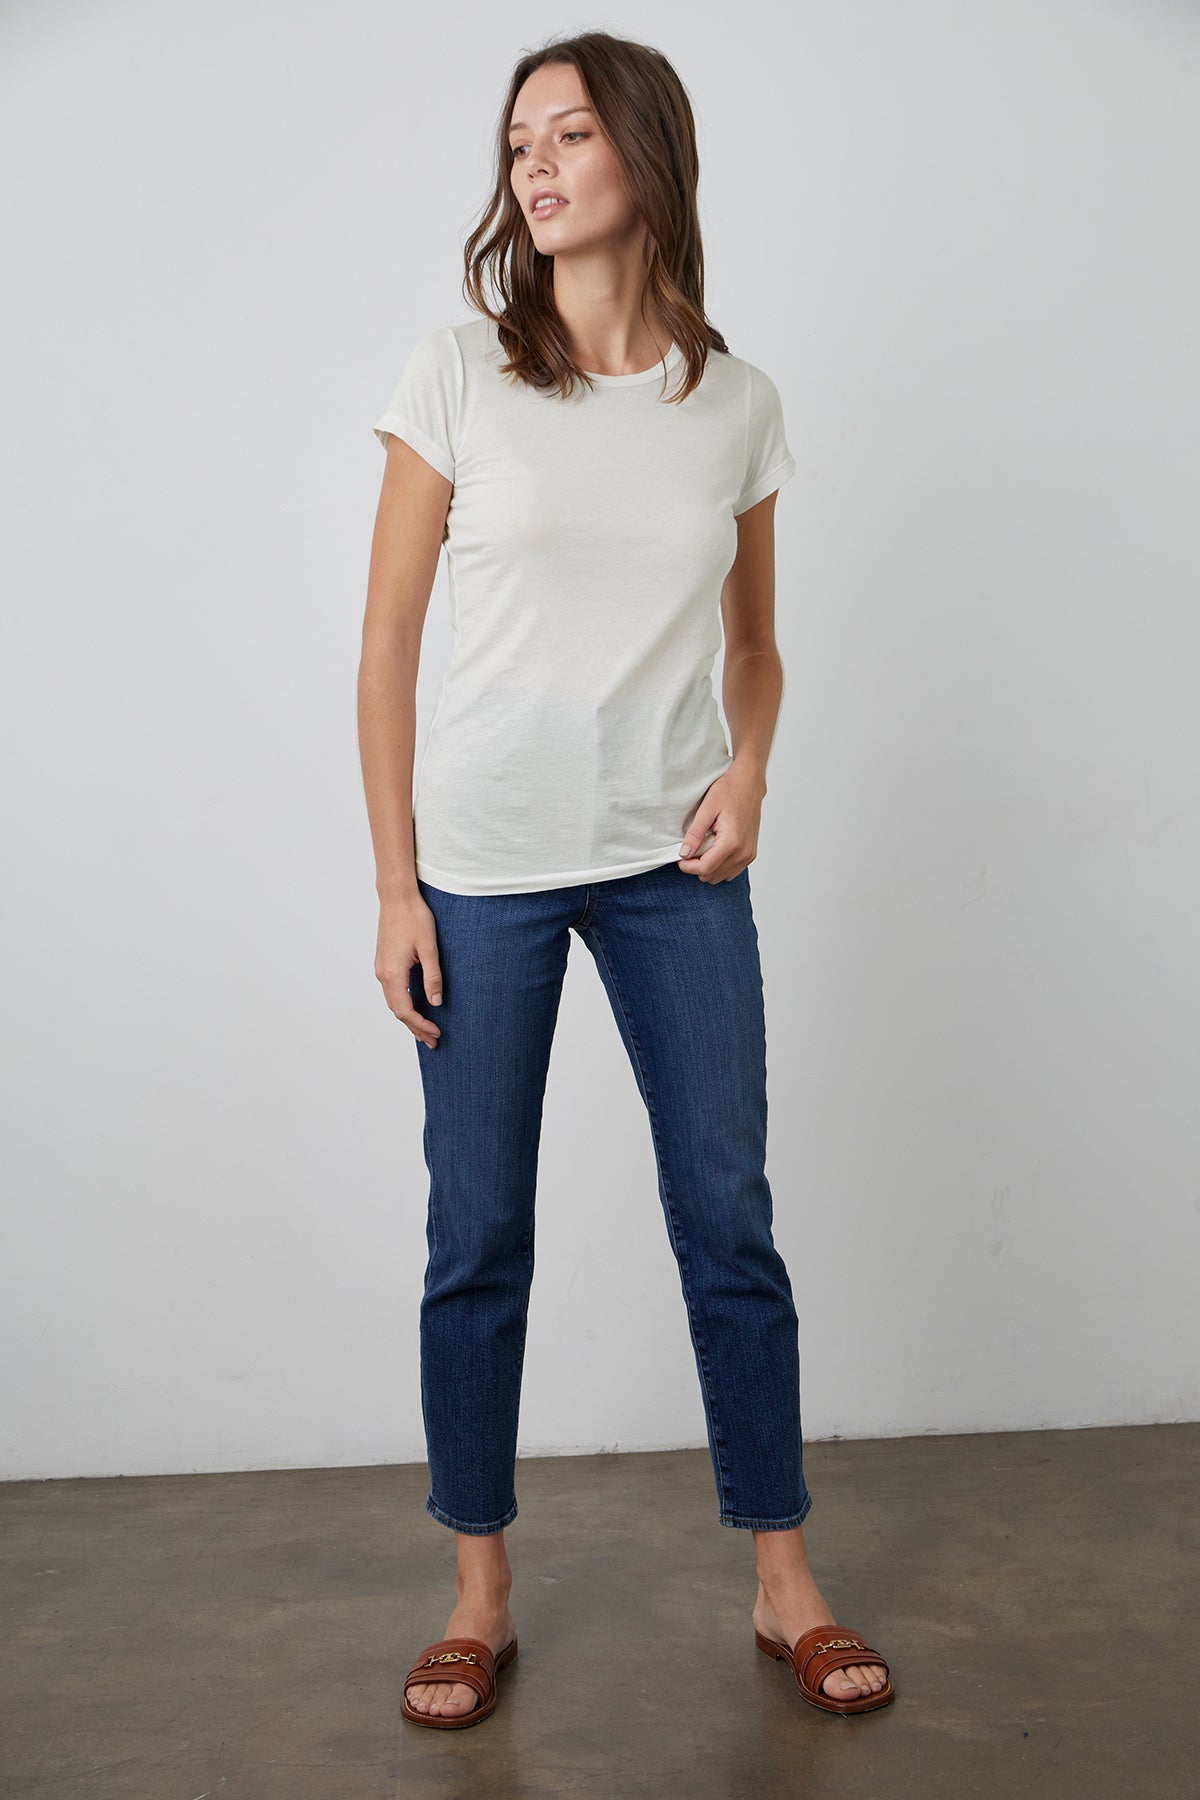   The model is wearing a JEMMA GAUZY WHISPER FITTED CREW NECK TEE by Velvet by Graham & Spencer and blue jeans. 